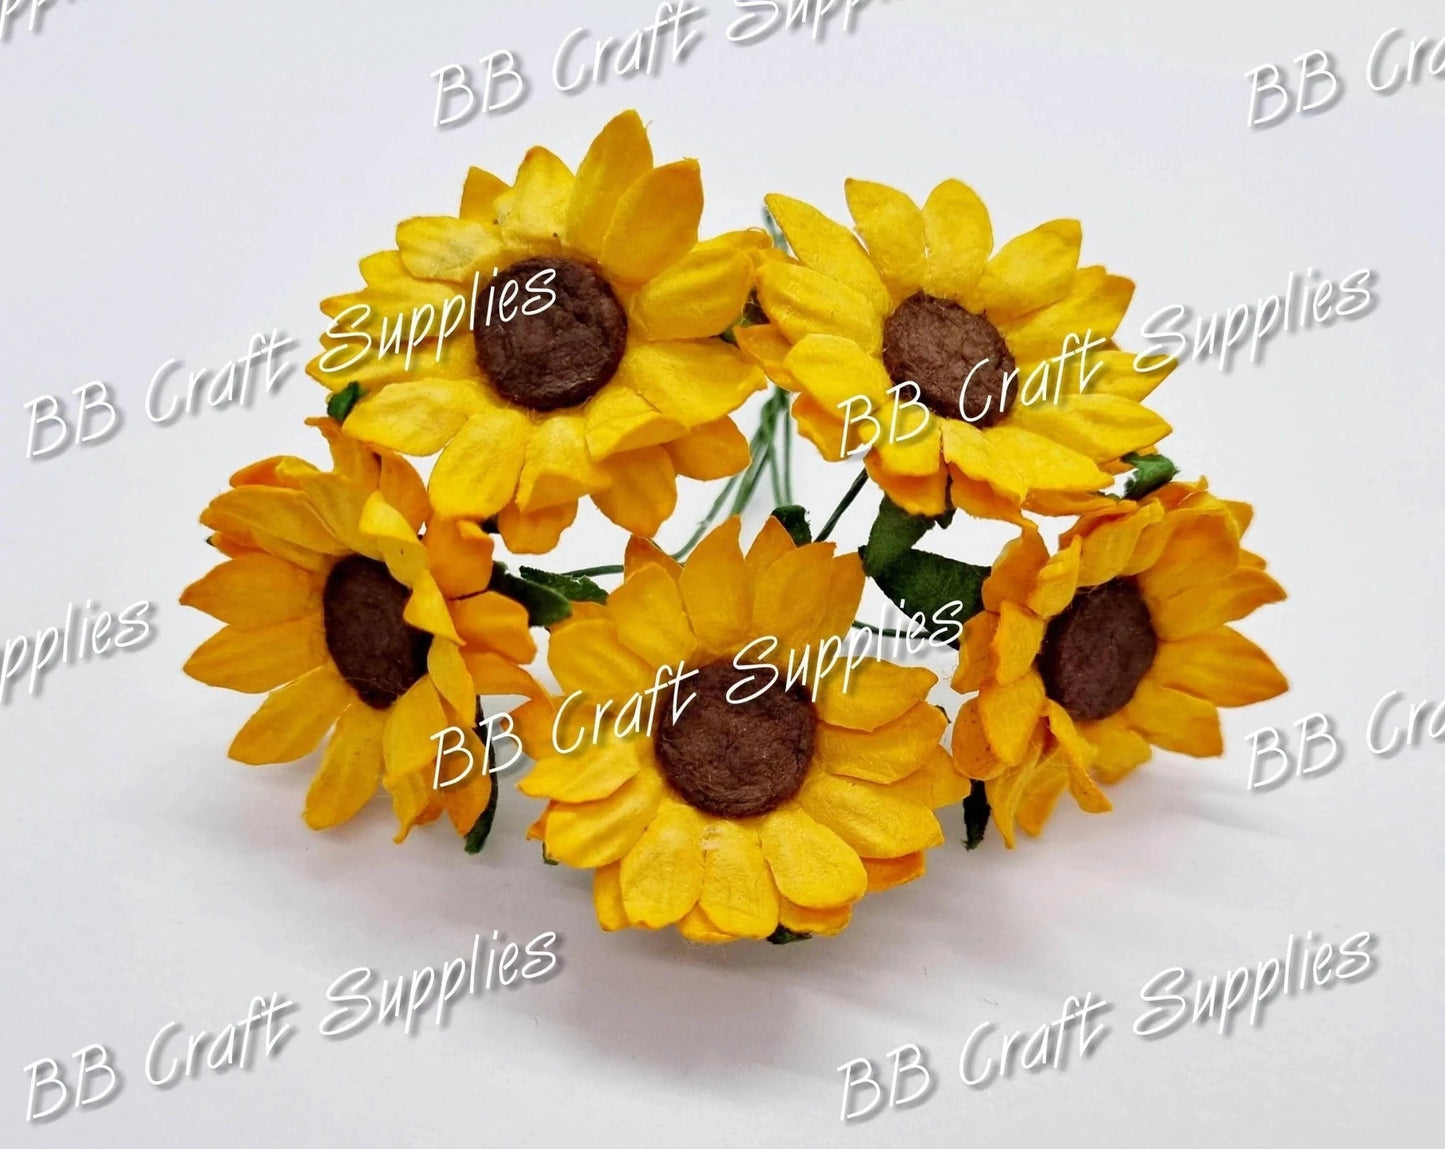 Sunflowers 5 Pack - country, Embelishment, Flower, Mulburry, mullberry, sunflower, wiggles, yellow - Bare Butler Faux Leather Supplies 